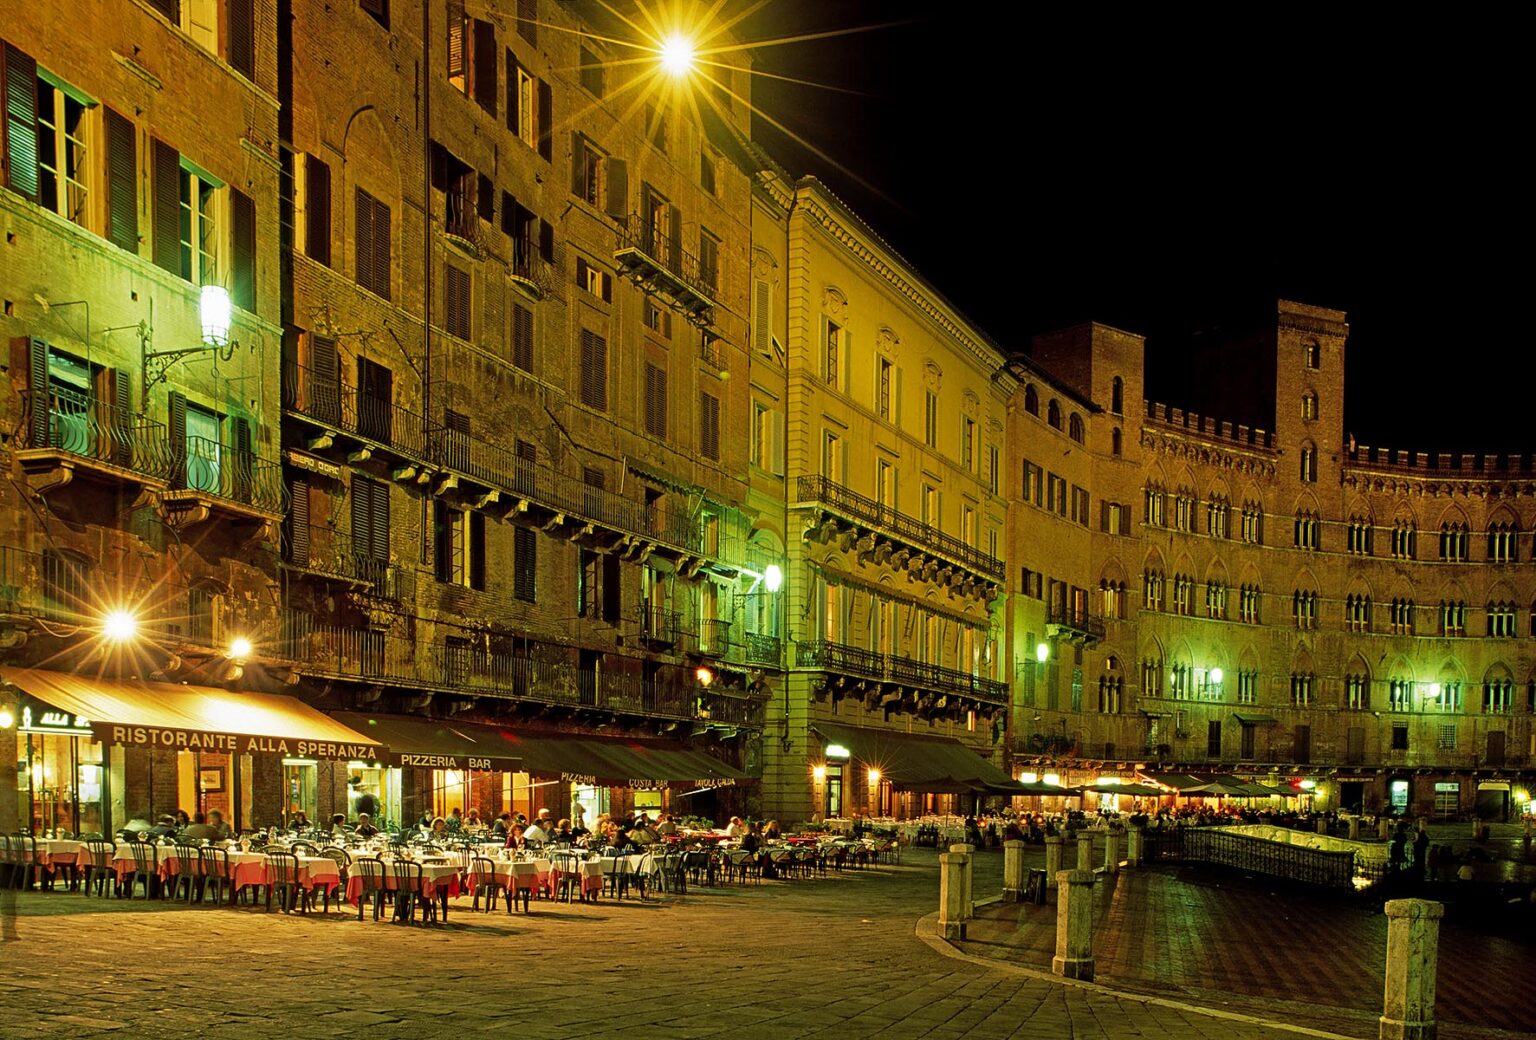 Night shot of restaurants around the CAMPO (central plaza) in the MEDIEVAL city of SIENA - TUSCANY, ITALY